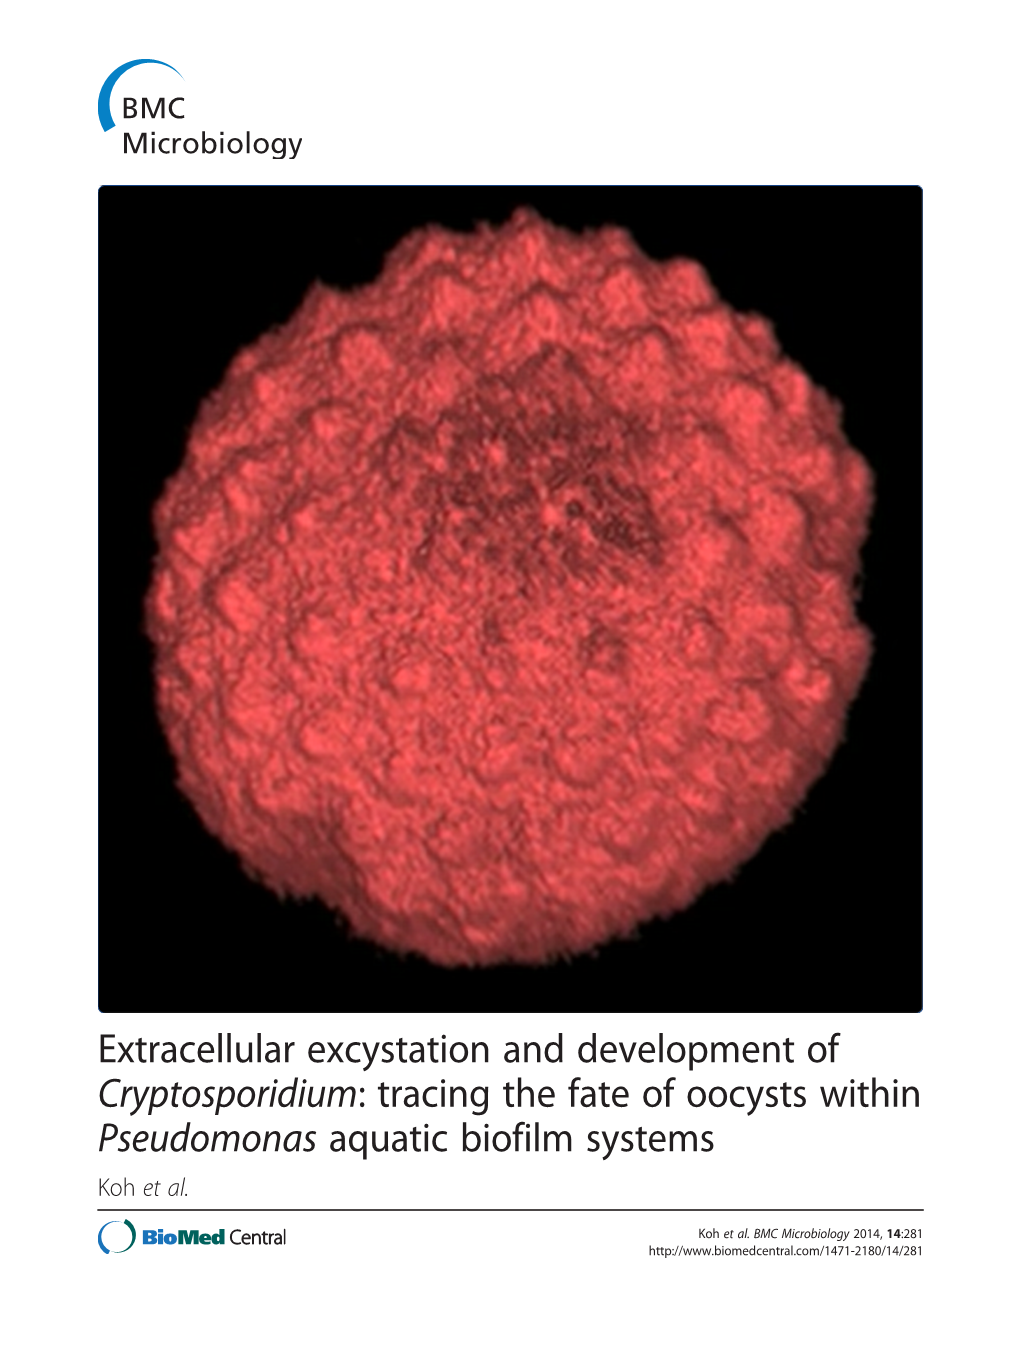 Extracellular Excystation and Development of Cryptosporidium: Tracing the Fate of Oocysts Within Pseudomonas Aquatic Biofilm Systems Koh Et Al